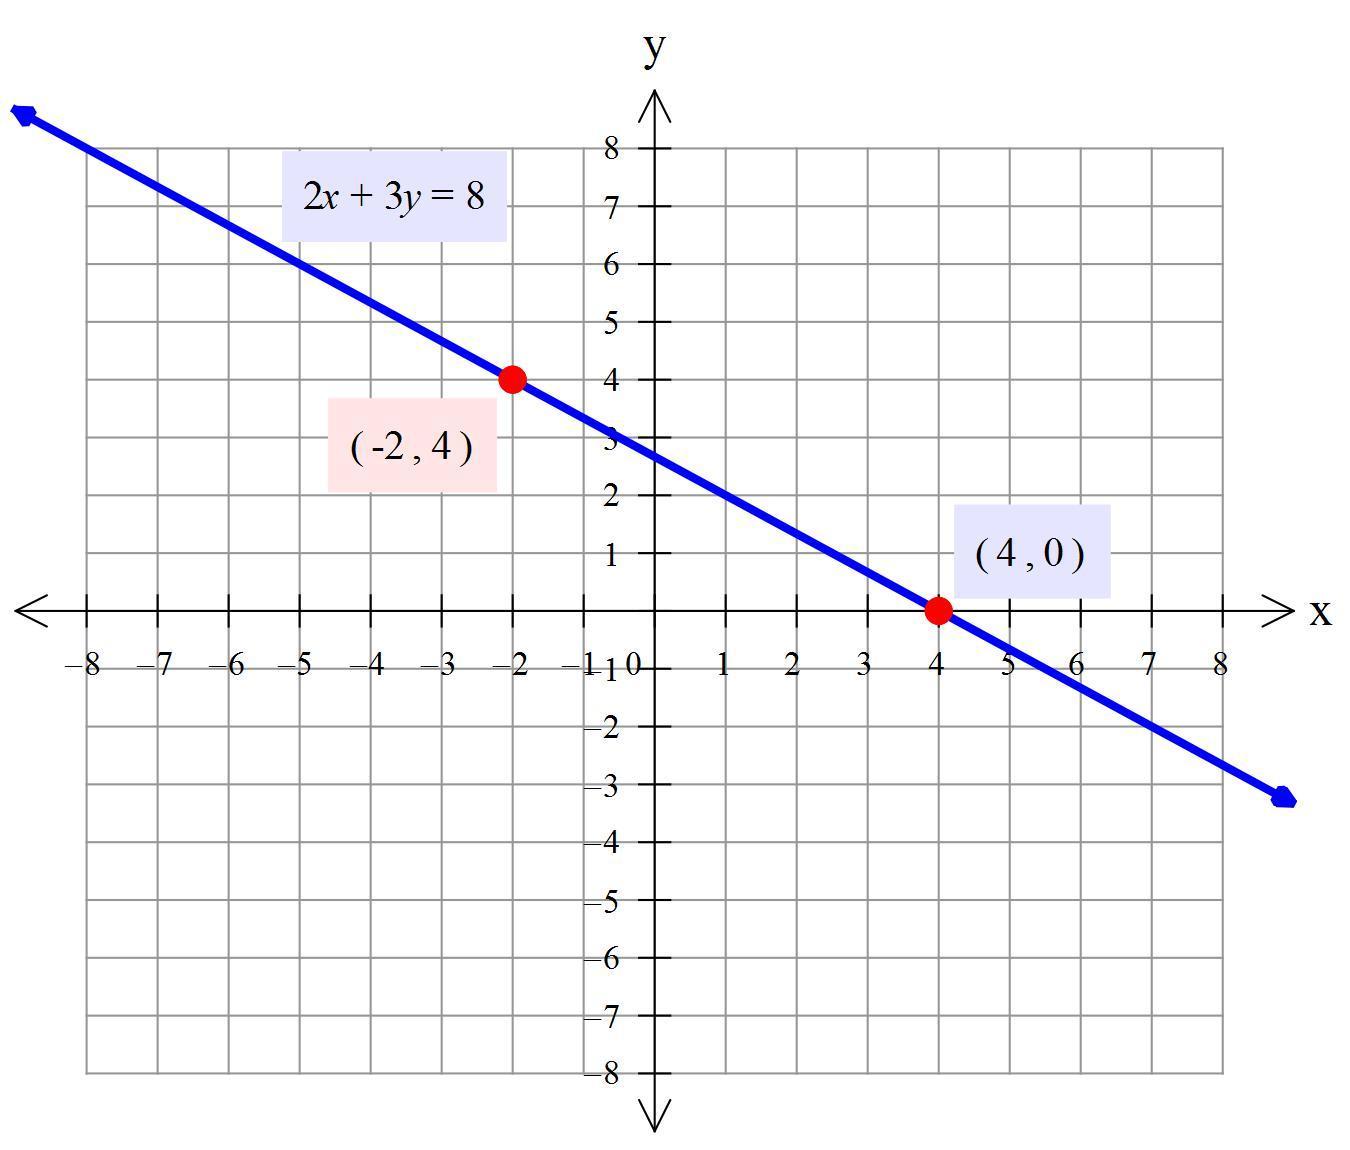 Graph The Line Represented By The Equation 2x + 3y = 8